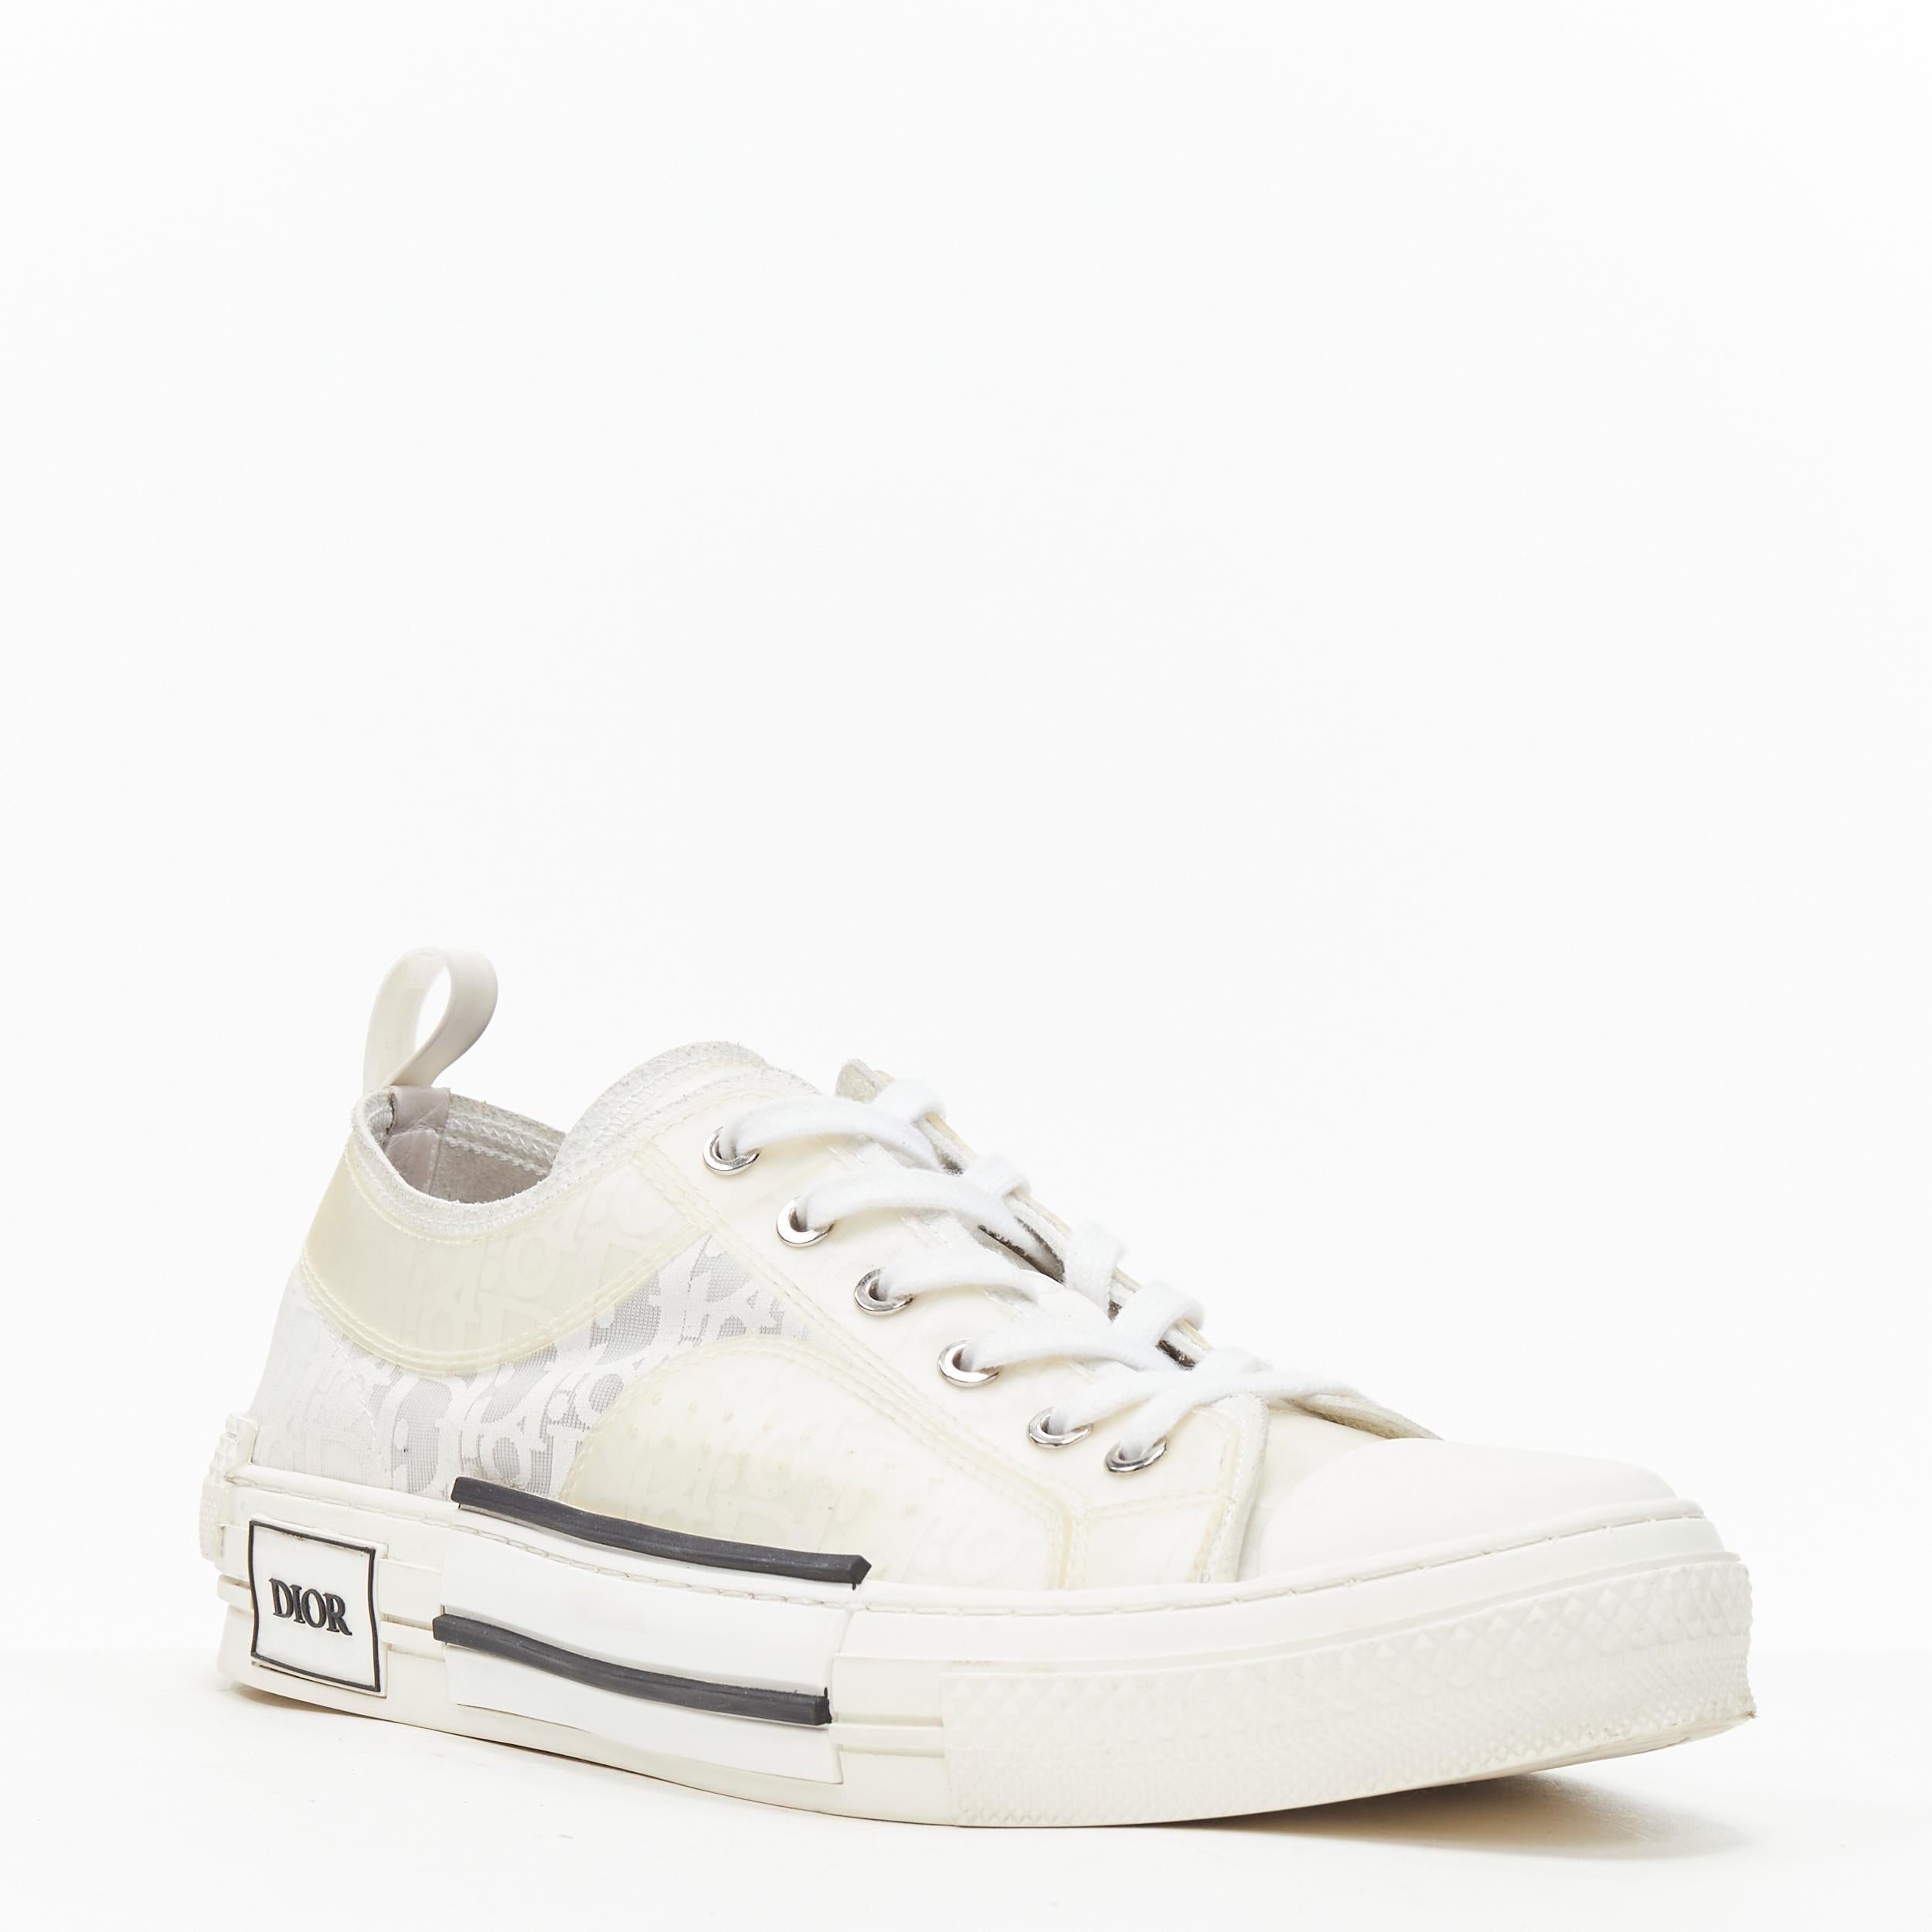 CHRISTIAN DIOR MEN Oblique B23 monogram print white low top sneaker EU42 Reference: TGAS/B00987 
Brand: Christian Dior 
Designer: Kim Jones 
Model: Oblique low top sneaker 
Material: Fabric 
Color: White 
Pattern: Solid 
Closure: Lace Up 
Extra